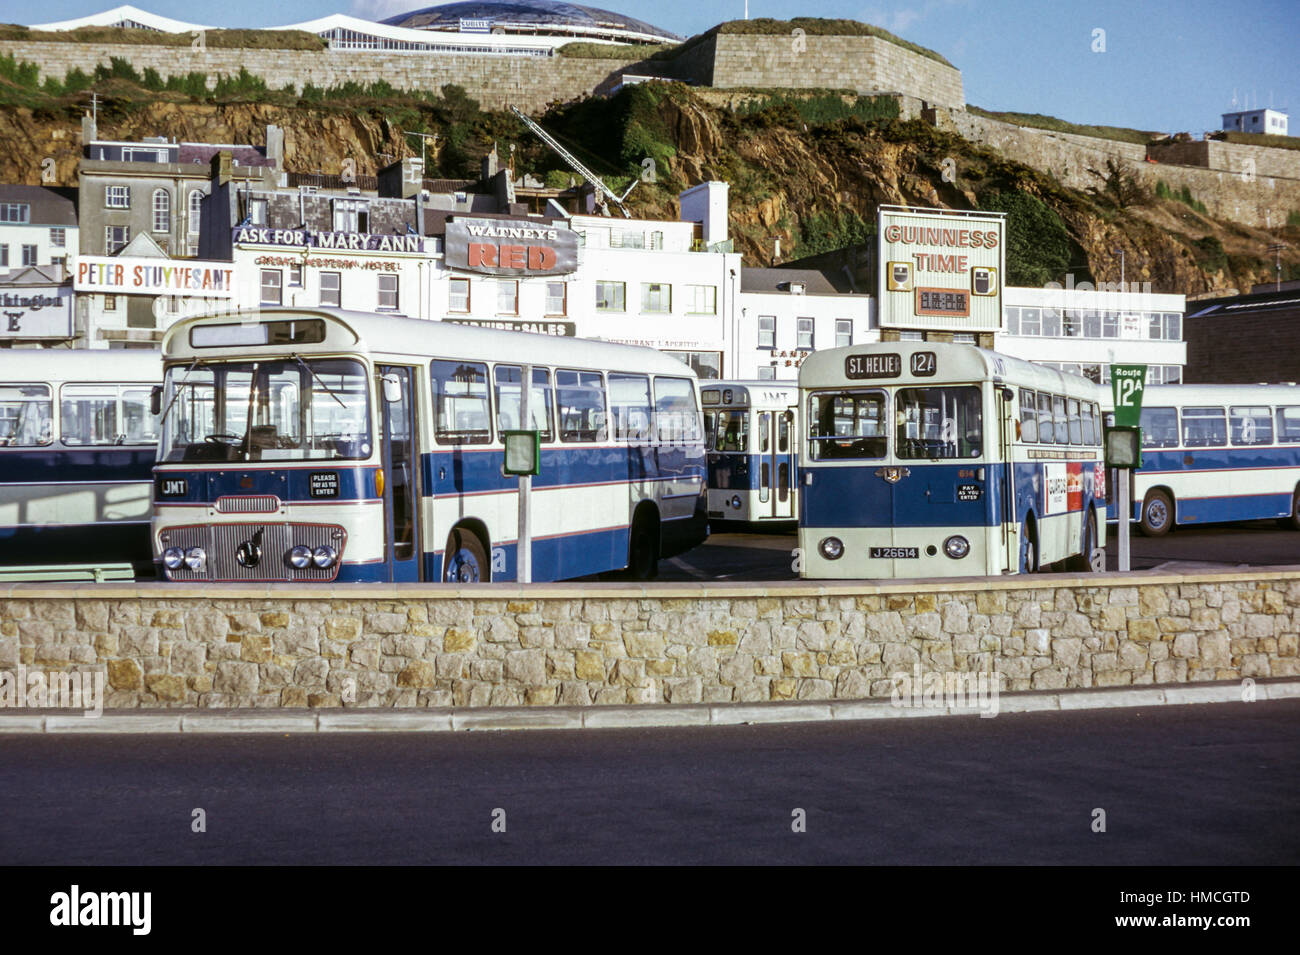 Jersey, Channel Islands - 1973: Vintage image of buses in St Helier, Jersey.  Jersey Motor Transport Leyland PSUC1/5 614 (registration J26614) and other  buses Stock Photo - Alamy